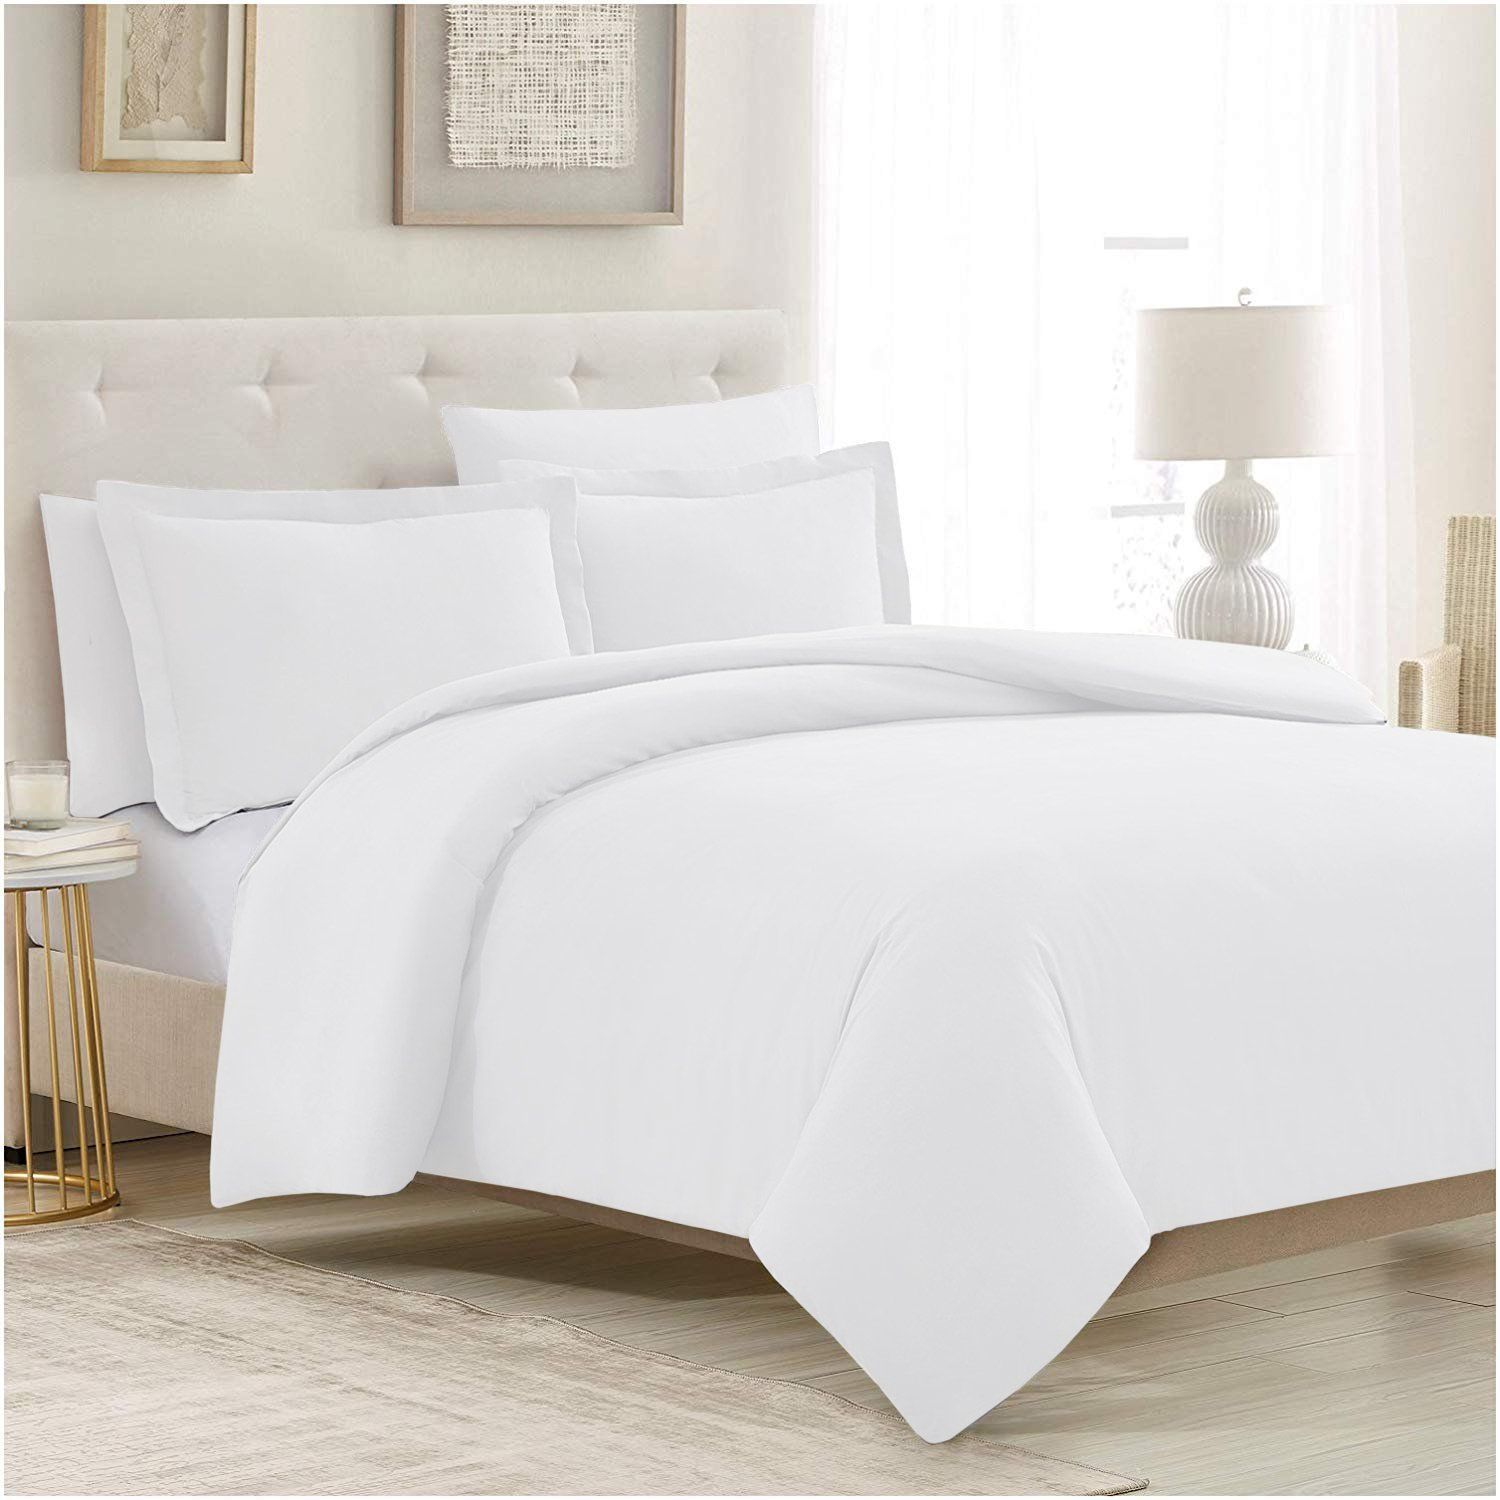 10 Best Duvet Covers Top Rated, How To Put On King Duvet Cover